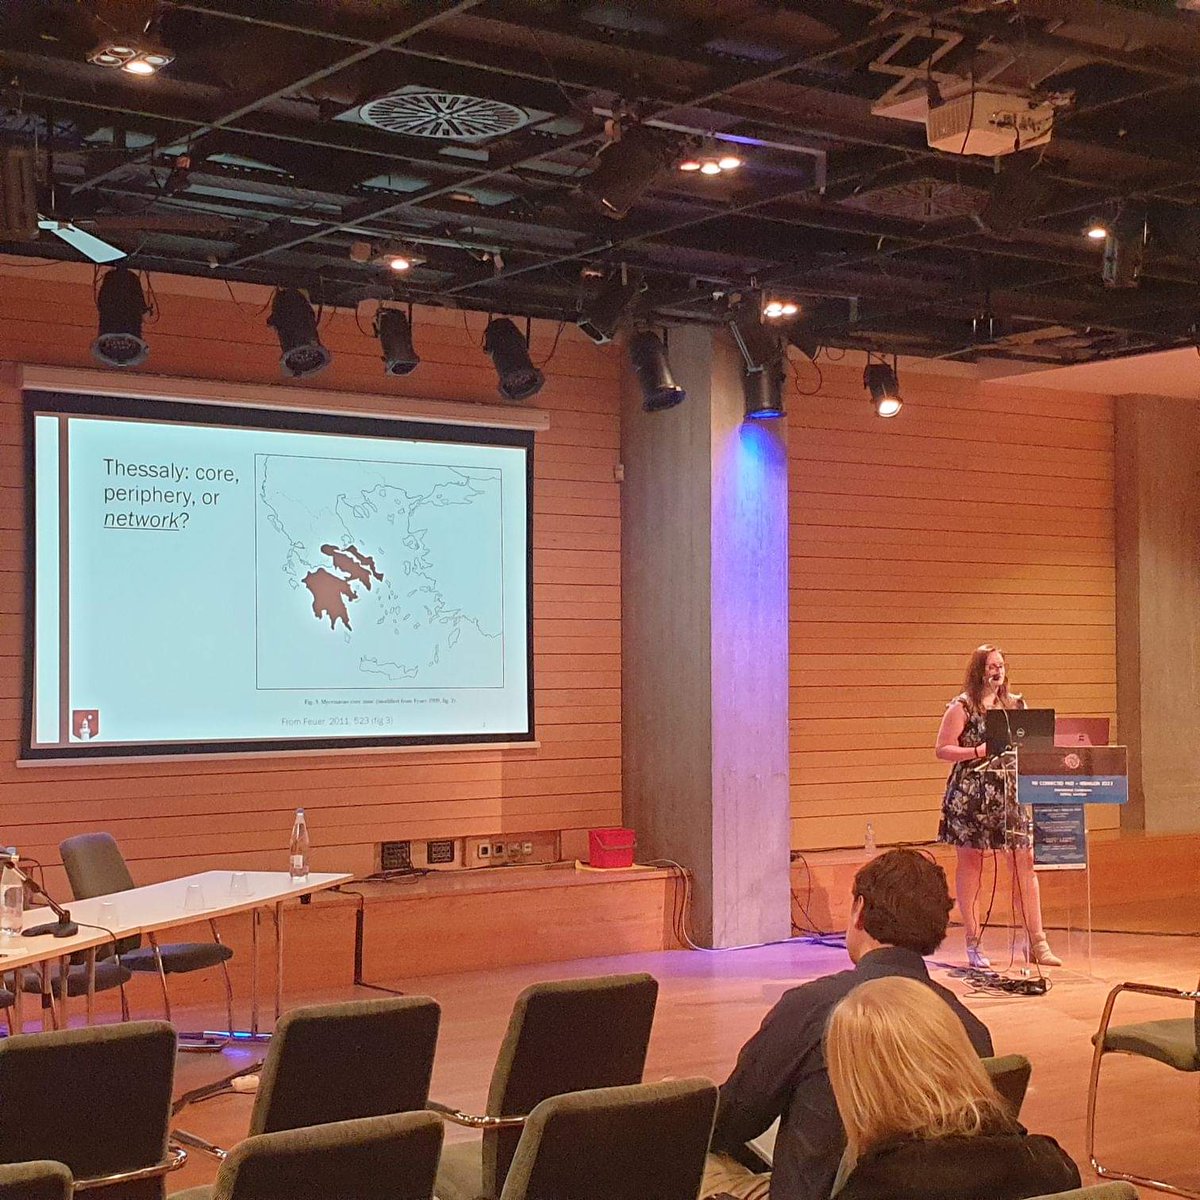 Feeling very grateful to have been given the opportunity to present my @ArtsHDR_MQ research at the #connectedpast conference Friday, connect with other researchers, & receive positive feedback! Big thanks to @annacfcollar @tombrughmans and @CarlKnappett for organising this! 🤩